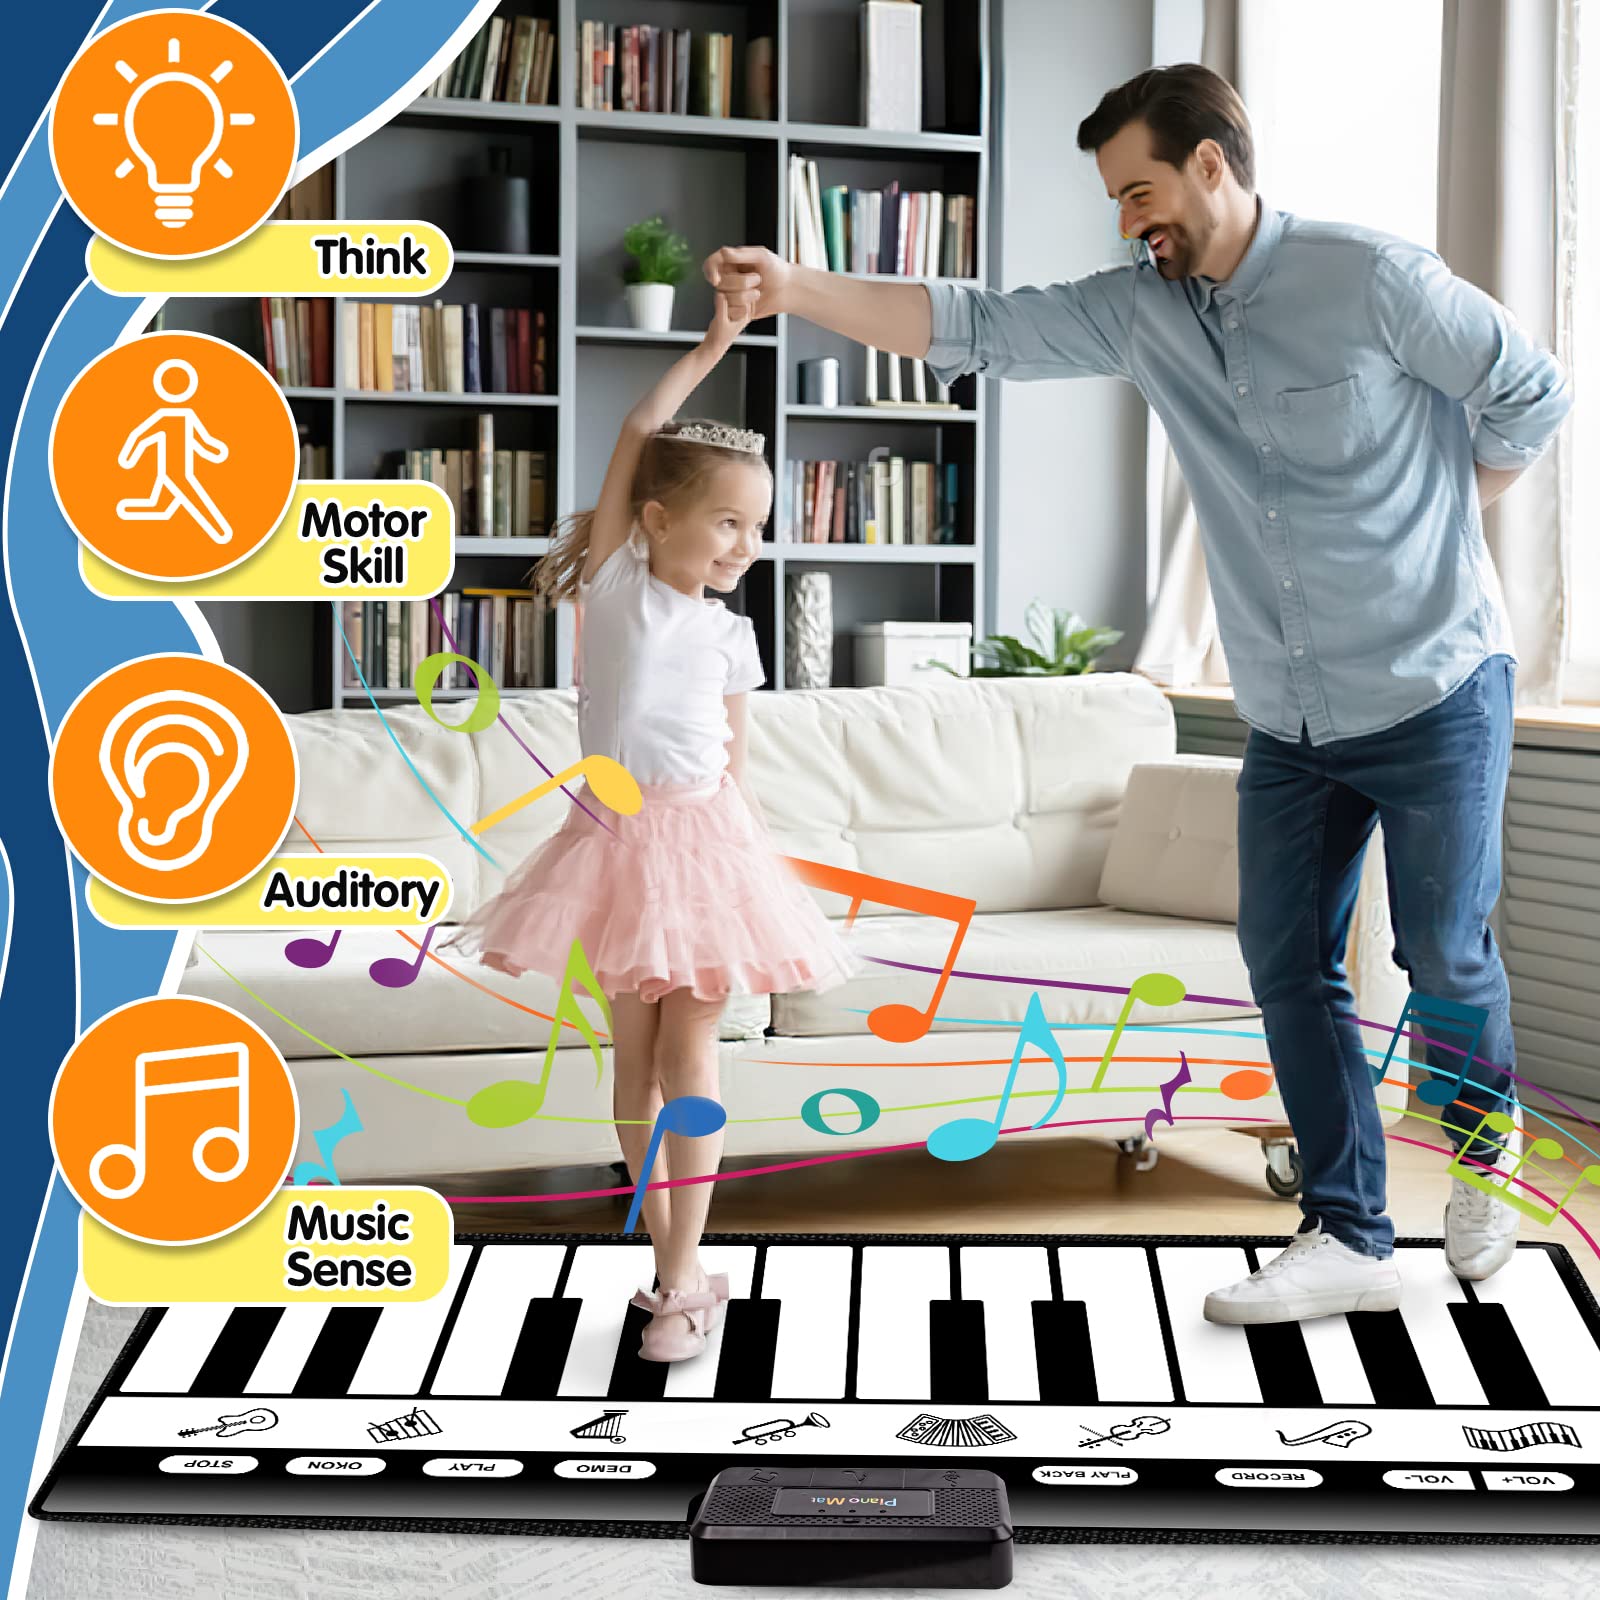 TWFRIC 6ft. Piano Mat with 24 Keys & 10 Demos & 8 Musical Instruments Sounds & 4 Play Modes, Giant Dance Floor Piano Music Play Mat 71'' Large Interactive Musical Toys Gifts for Kids Adults Toddlers